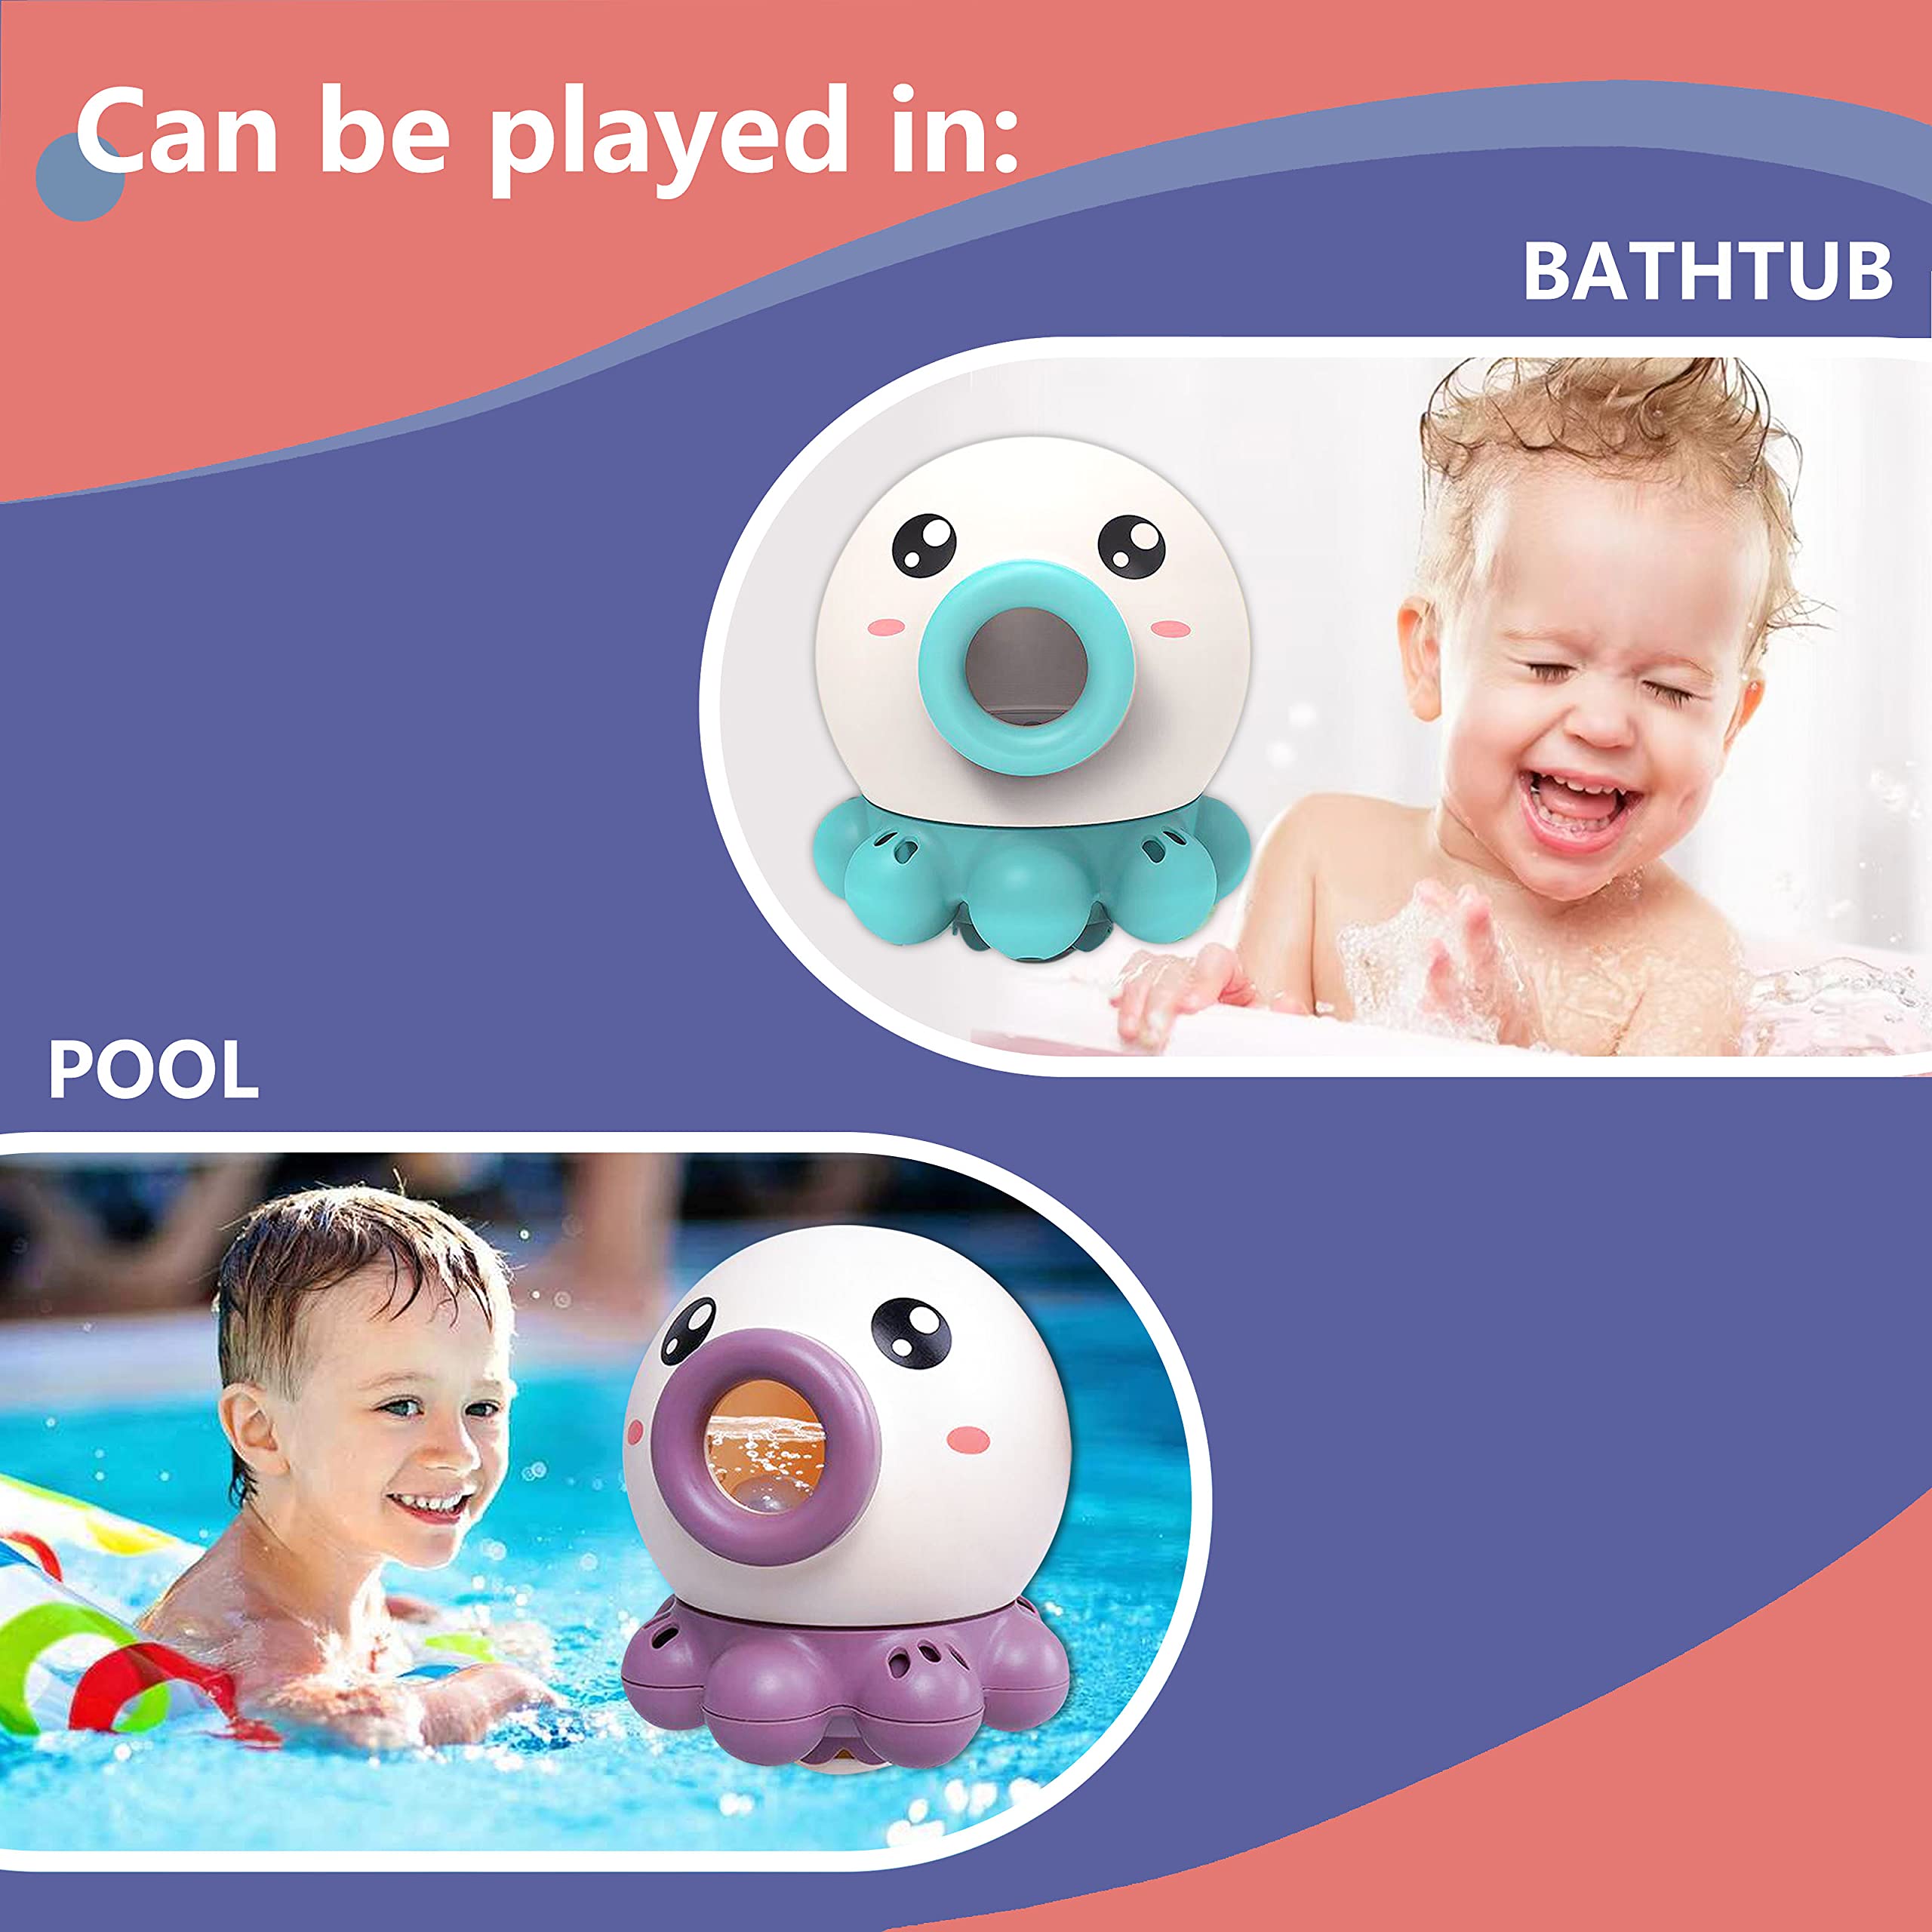 Octopus Fountain Bath Toy Water Jet Rotating Shower Bathroom Toy Summer Water Toys Sprinkler Beach Toys Kids Water Toys - Minihomy